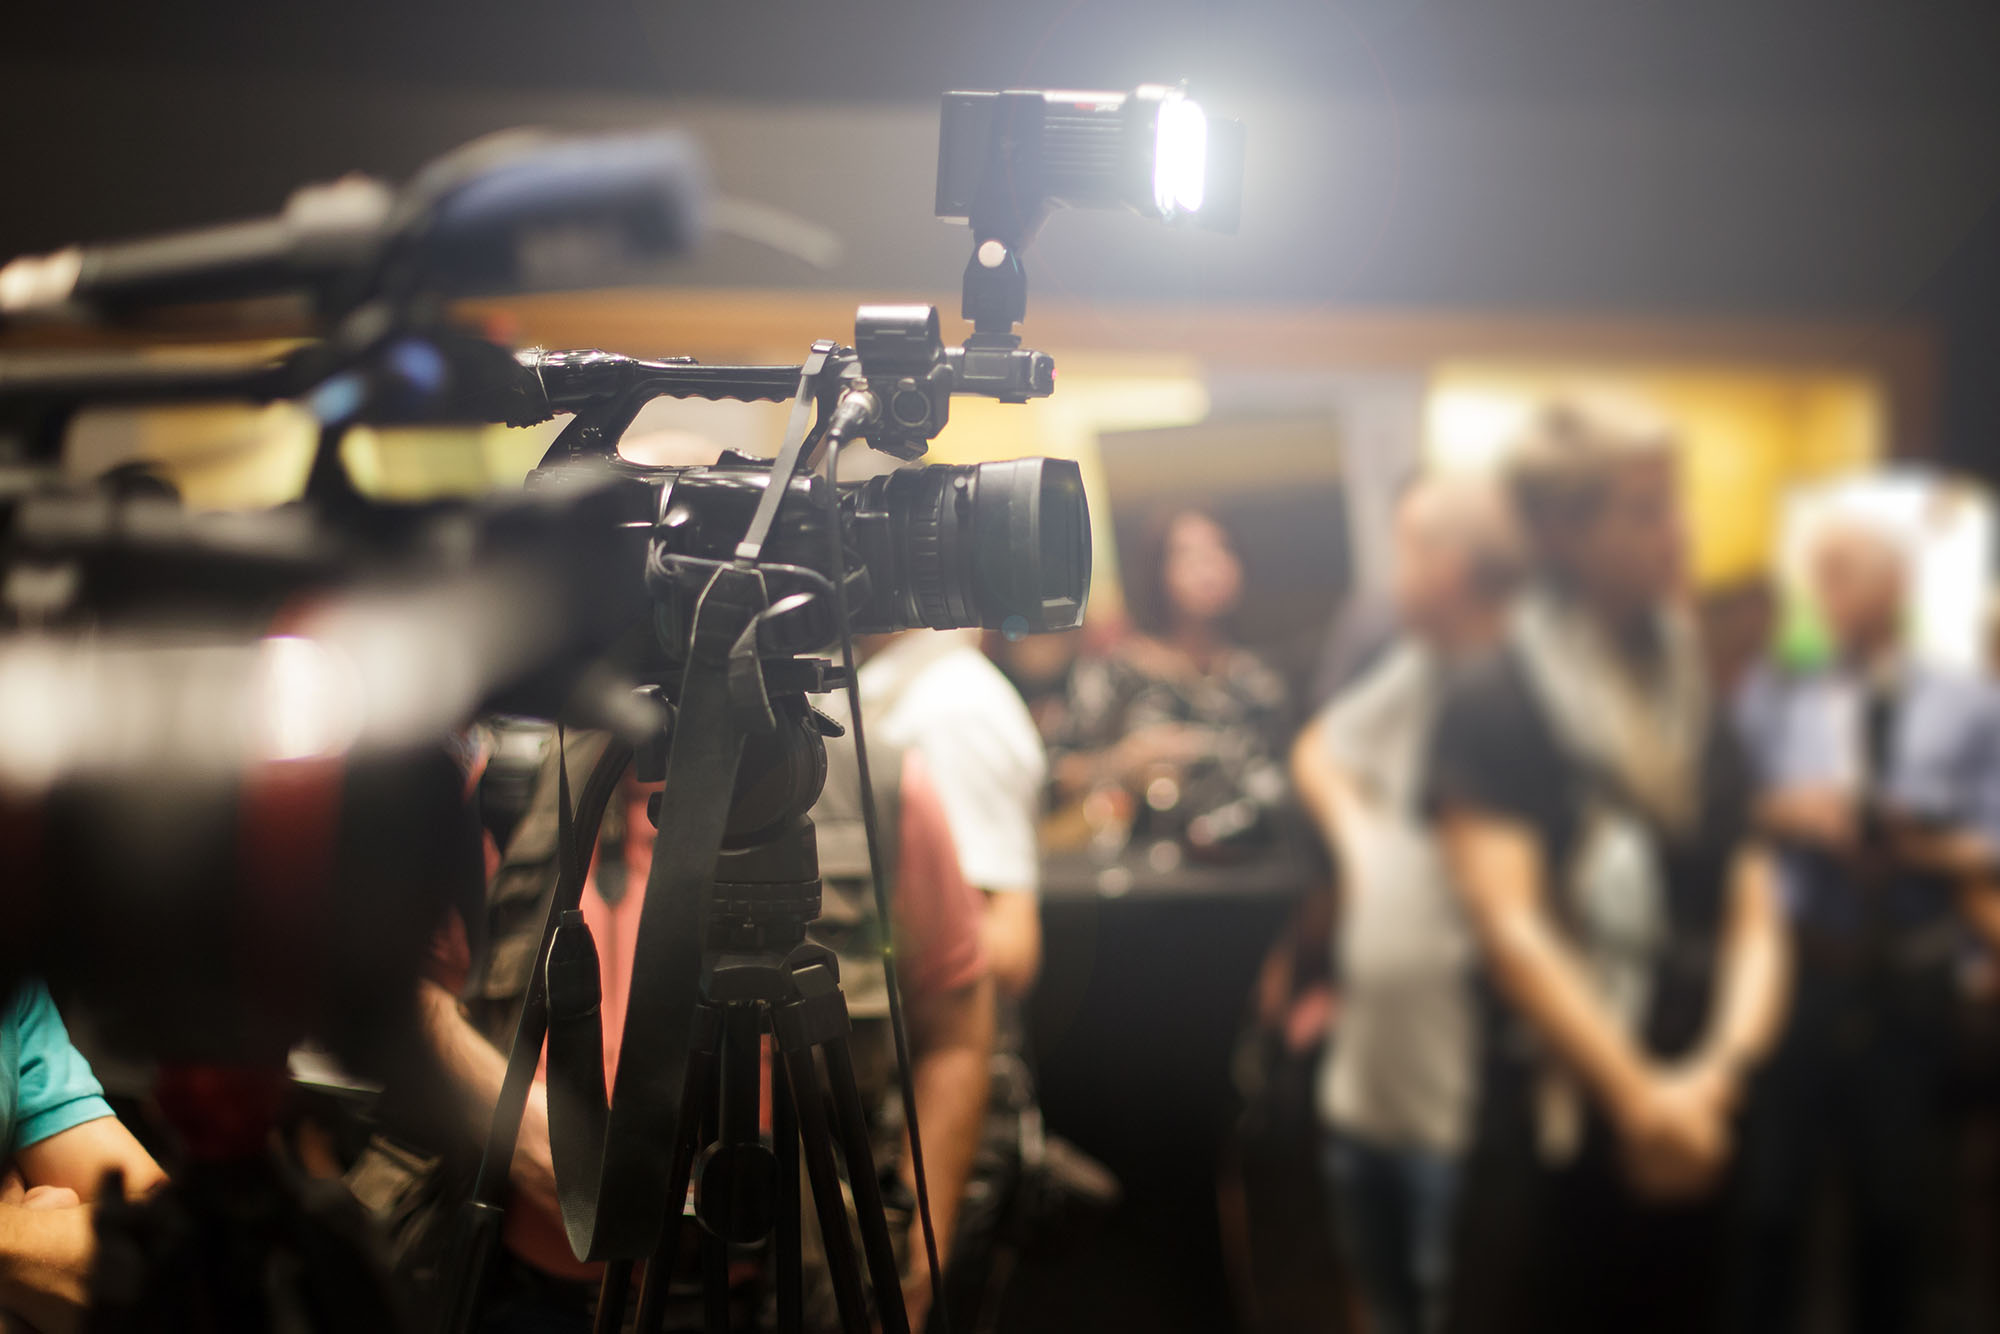 Press and cameras recording a conference event